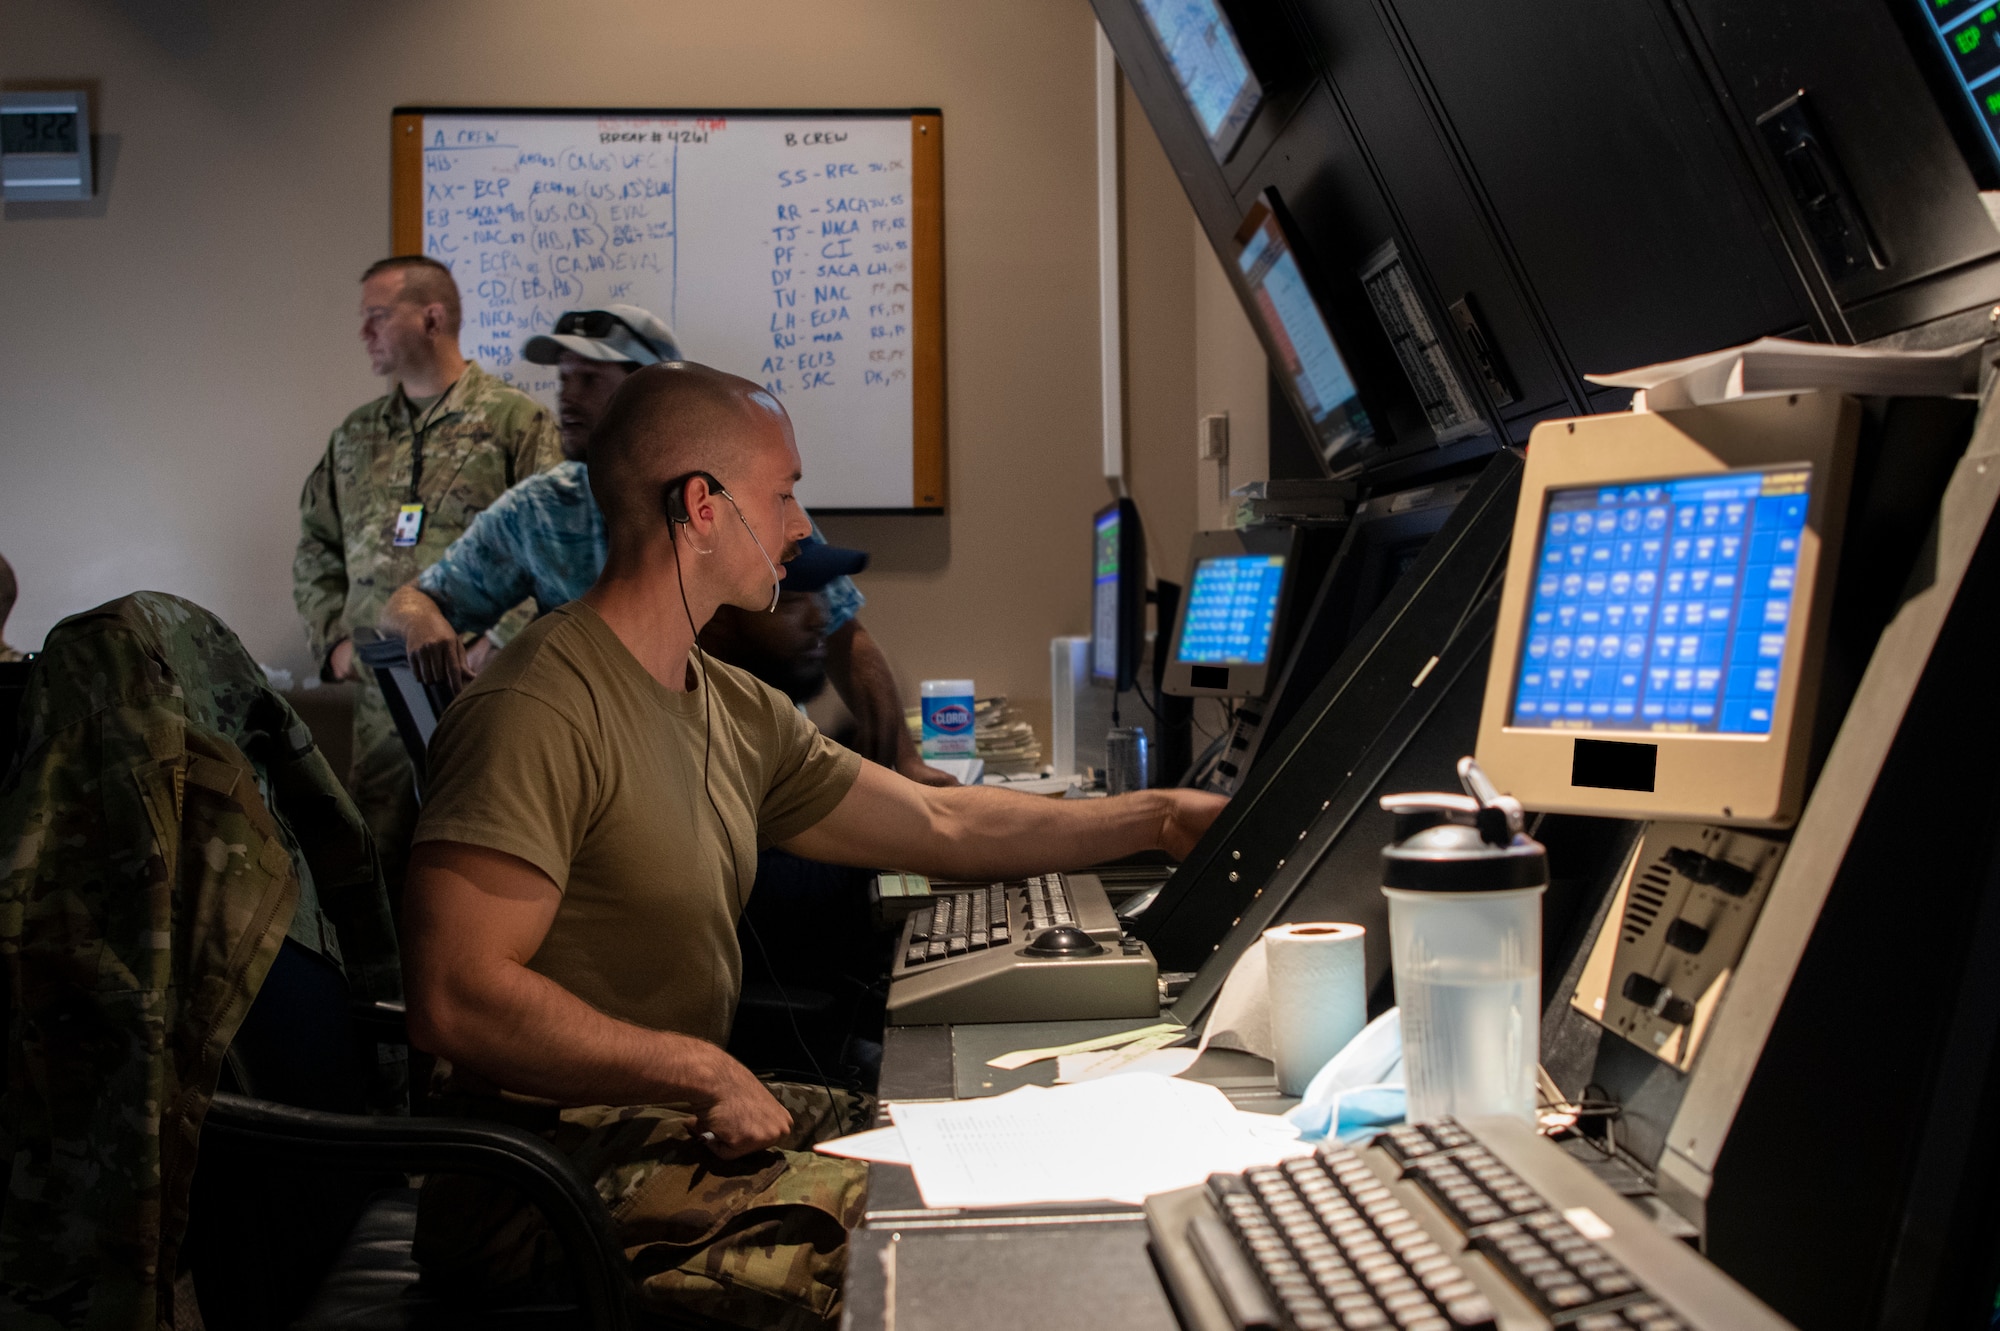 U.S. Air Force Airman sits in front of computer screens